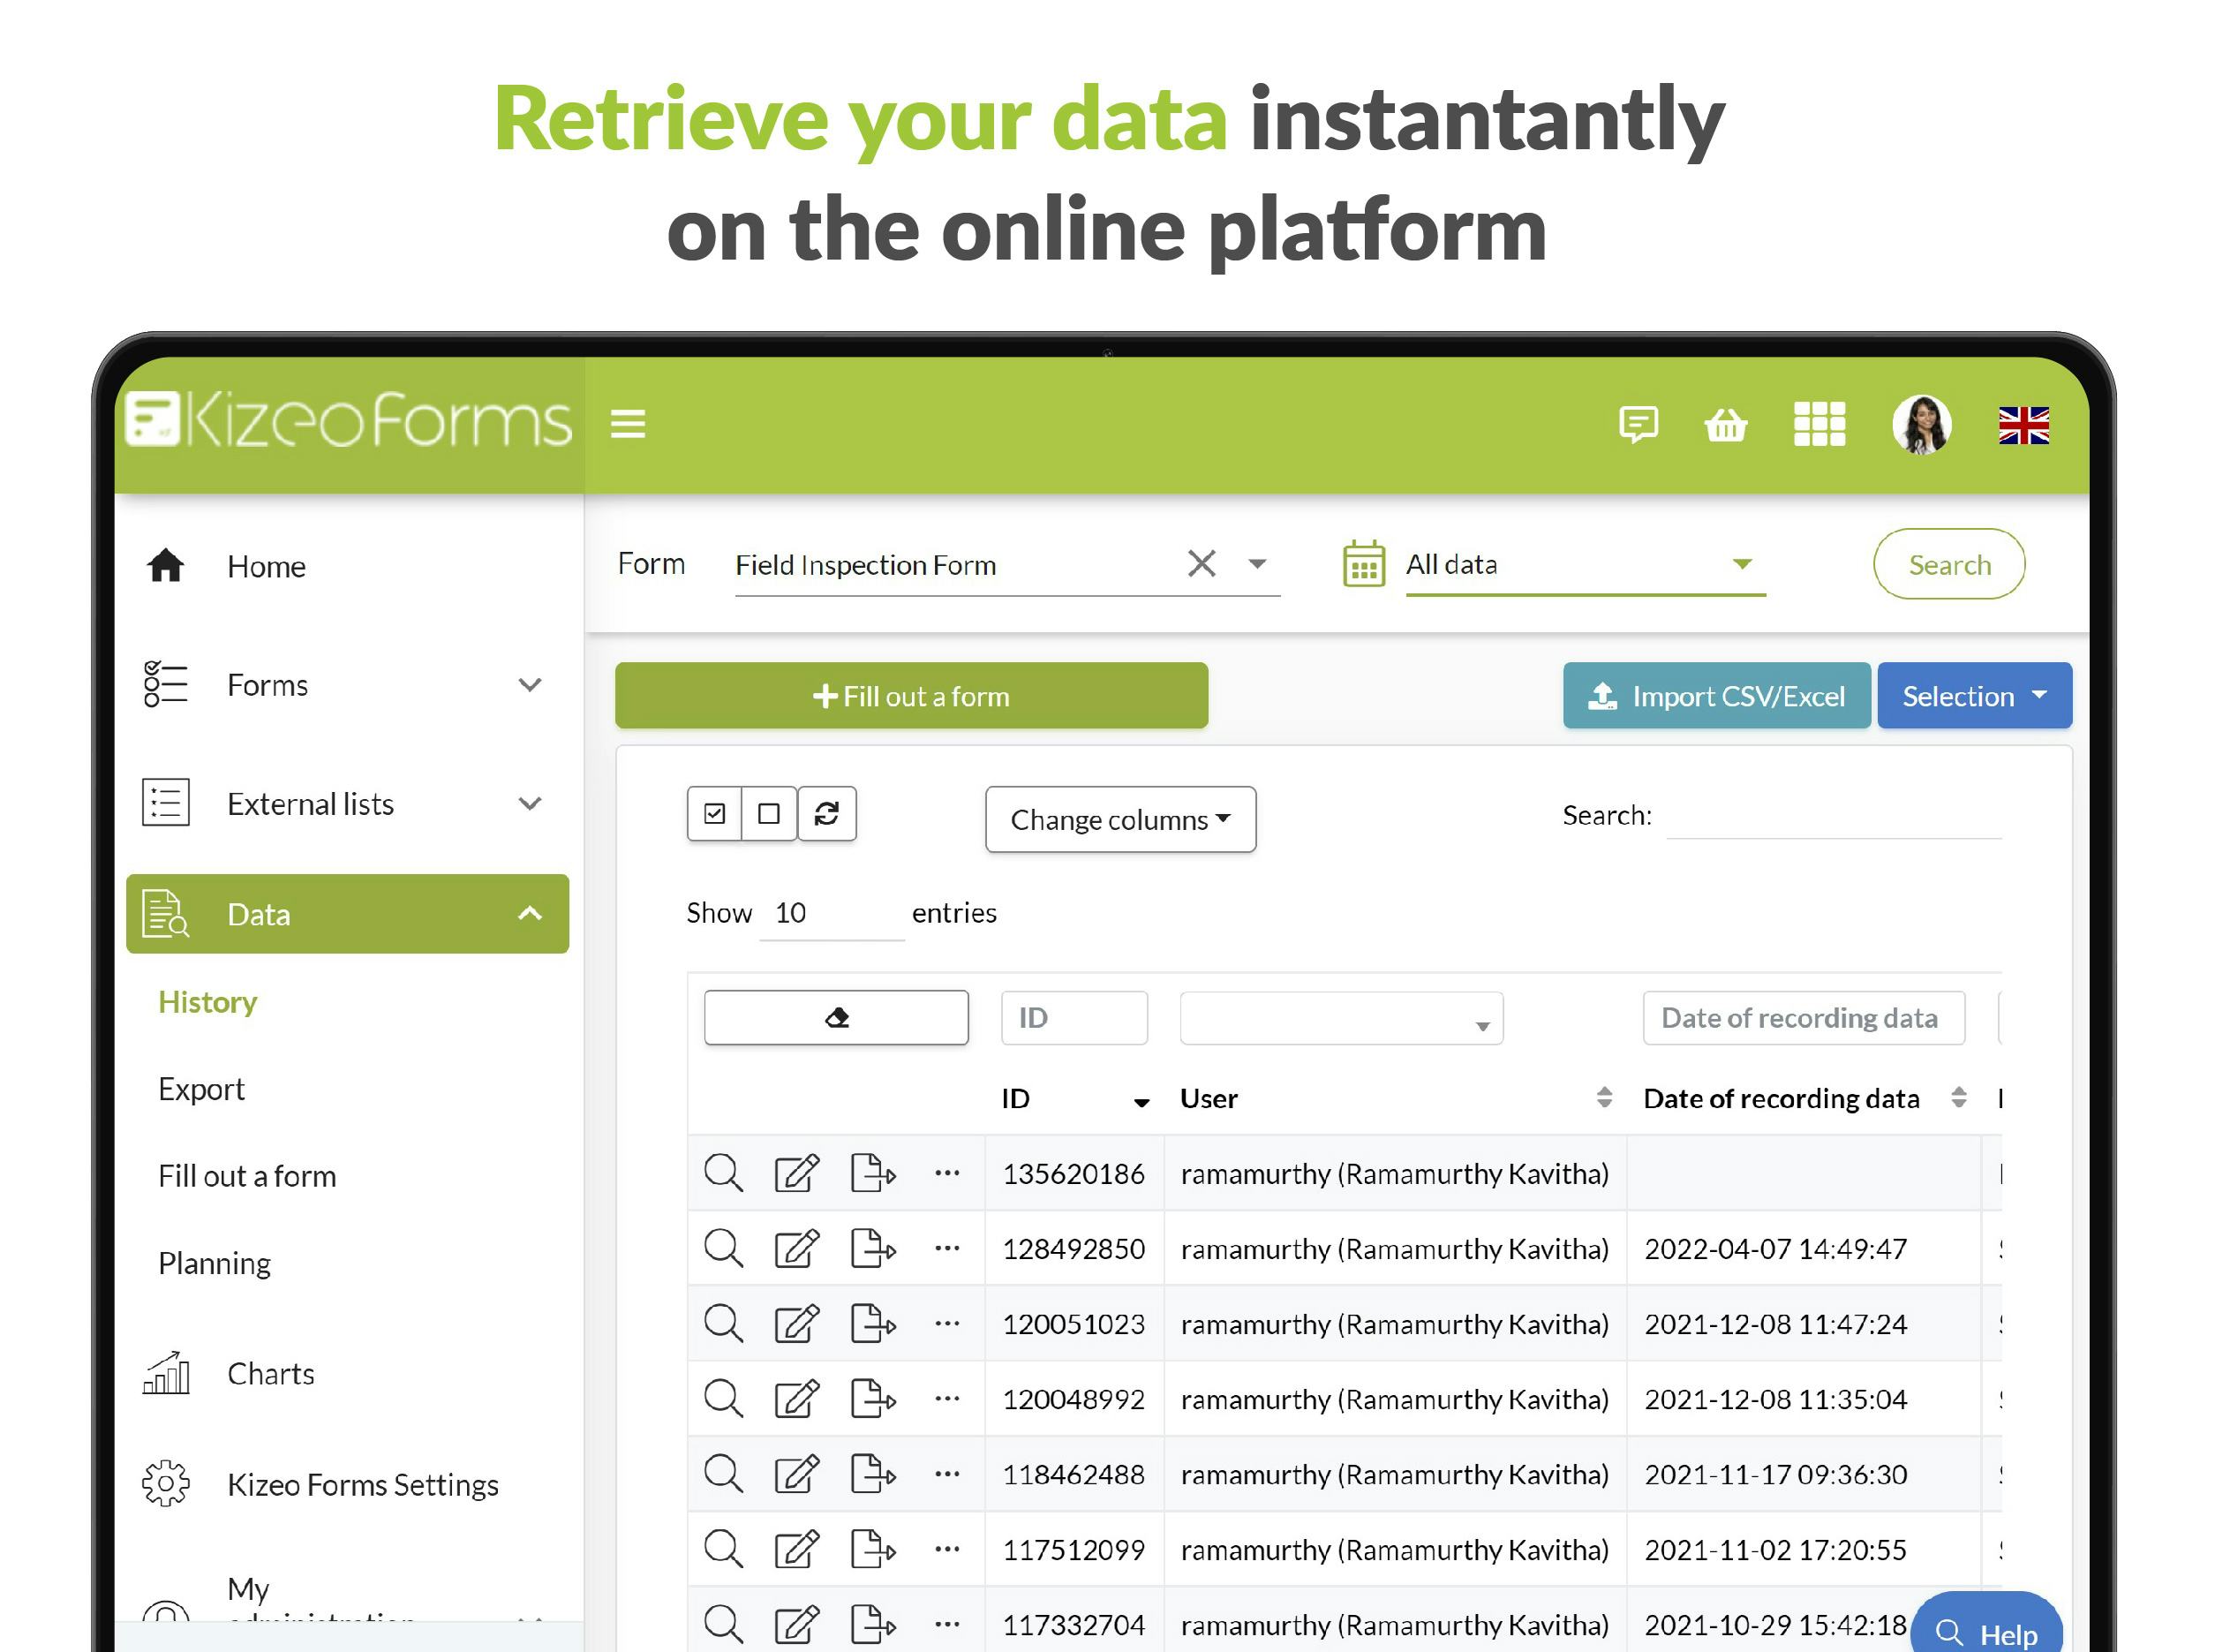 Kizeo Forms Software - Retrieve your data instantly